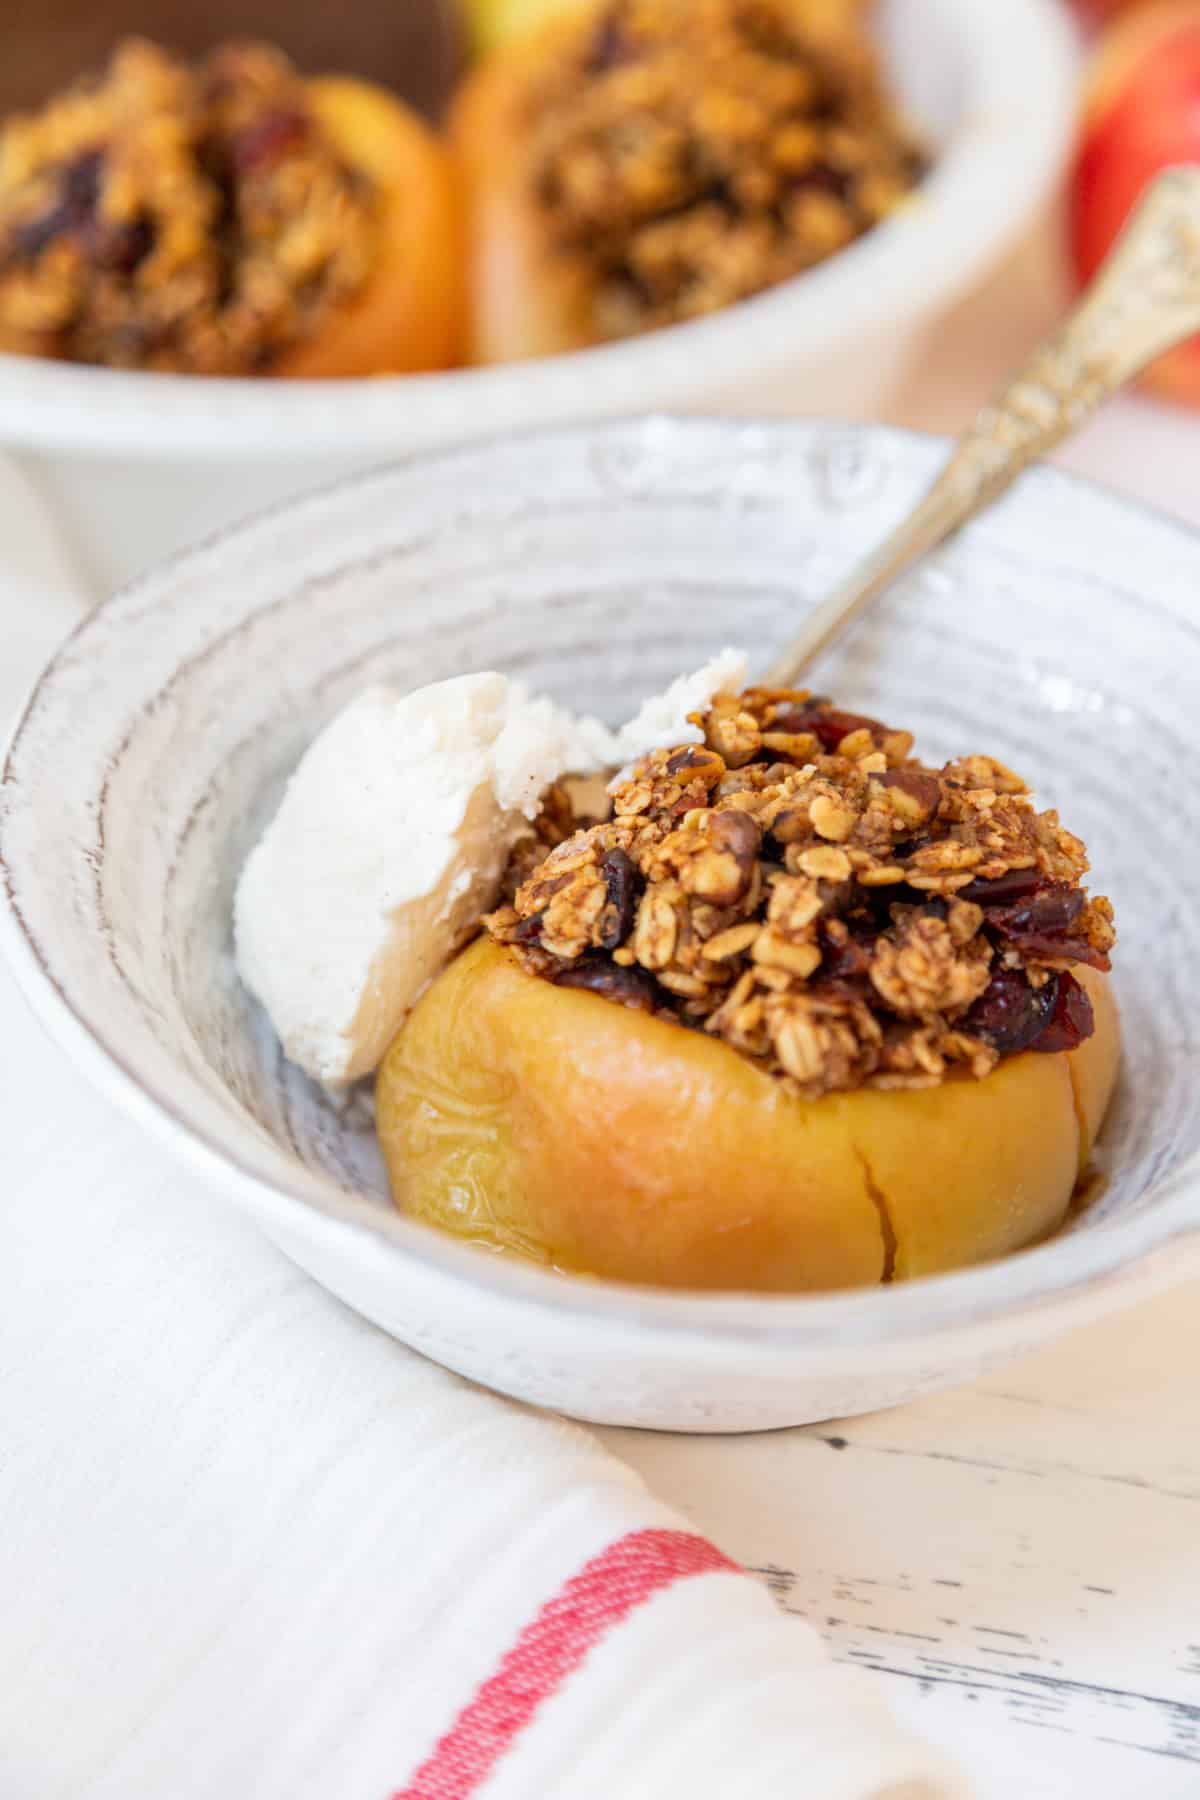 A baked apple stuffed with an oat filling and a scoop of vanilla ice cream on the side in a white bowl. 